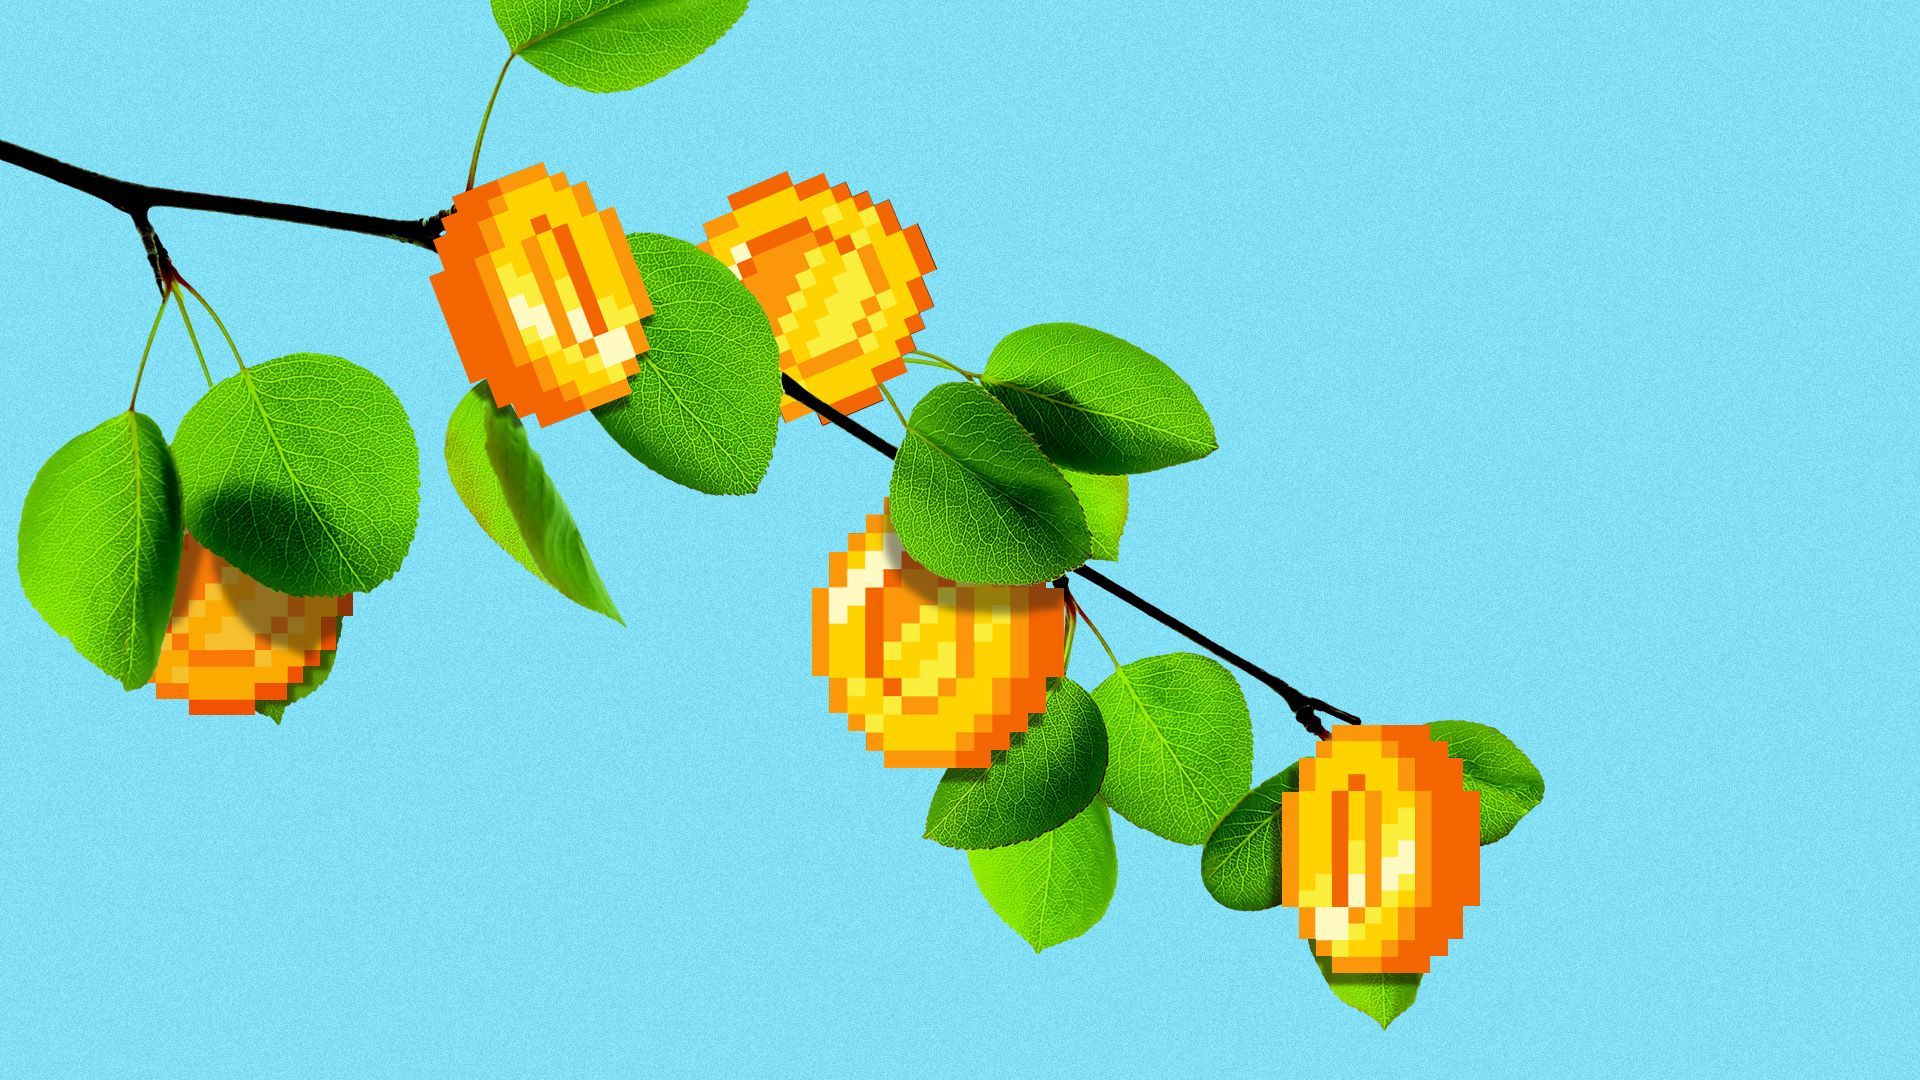 Illustration of a tree branch with pixelated crypto coins as fruit